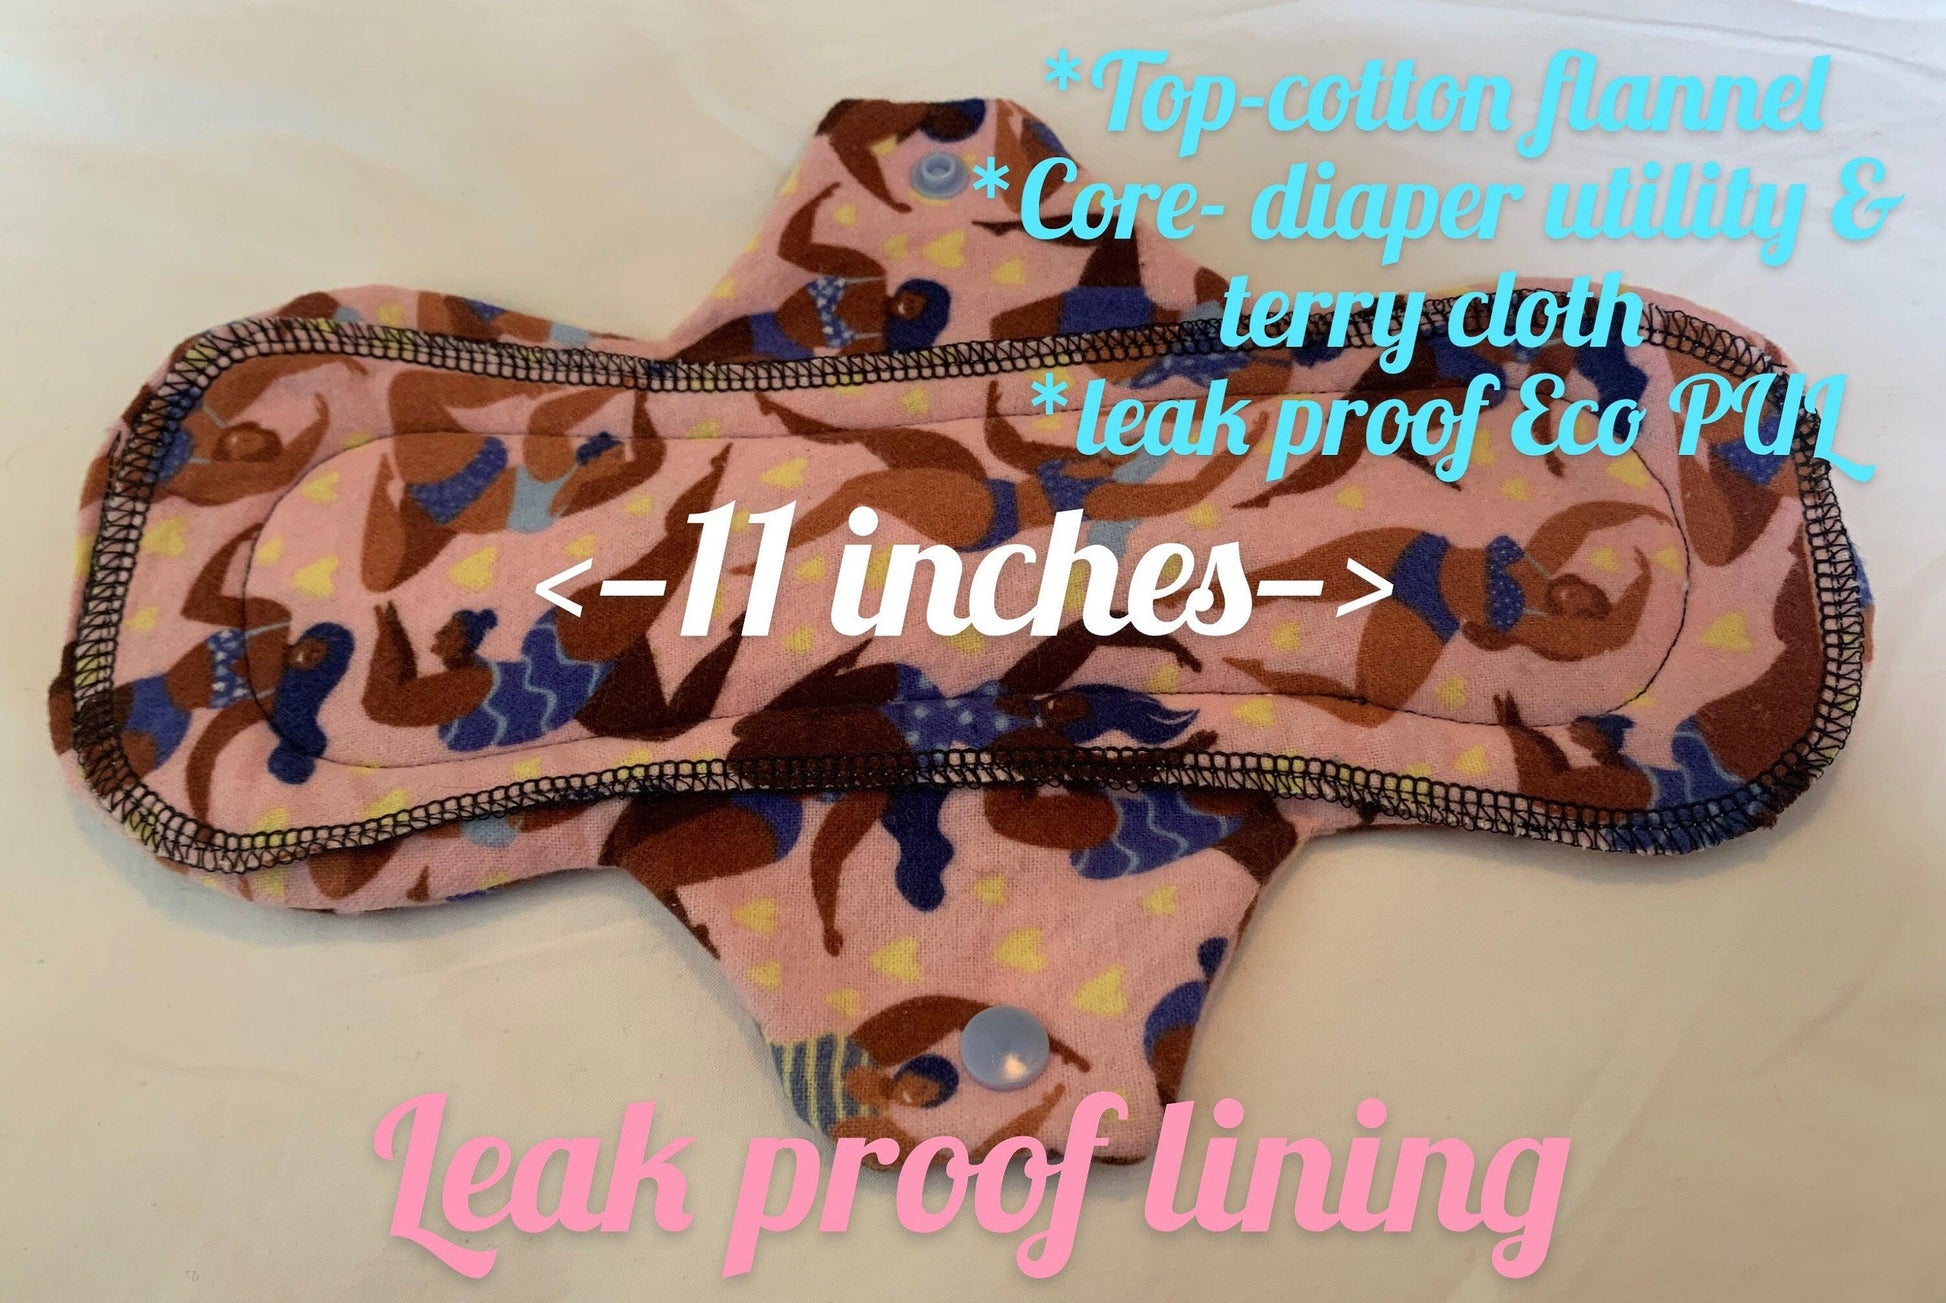 Overnight heavy flow reusable menstrual and incontinence pads - Earth Friendly Options